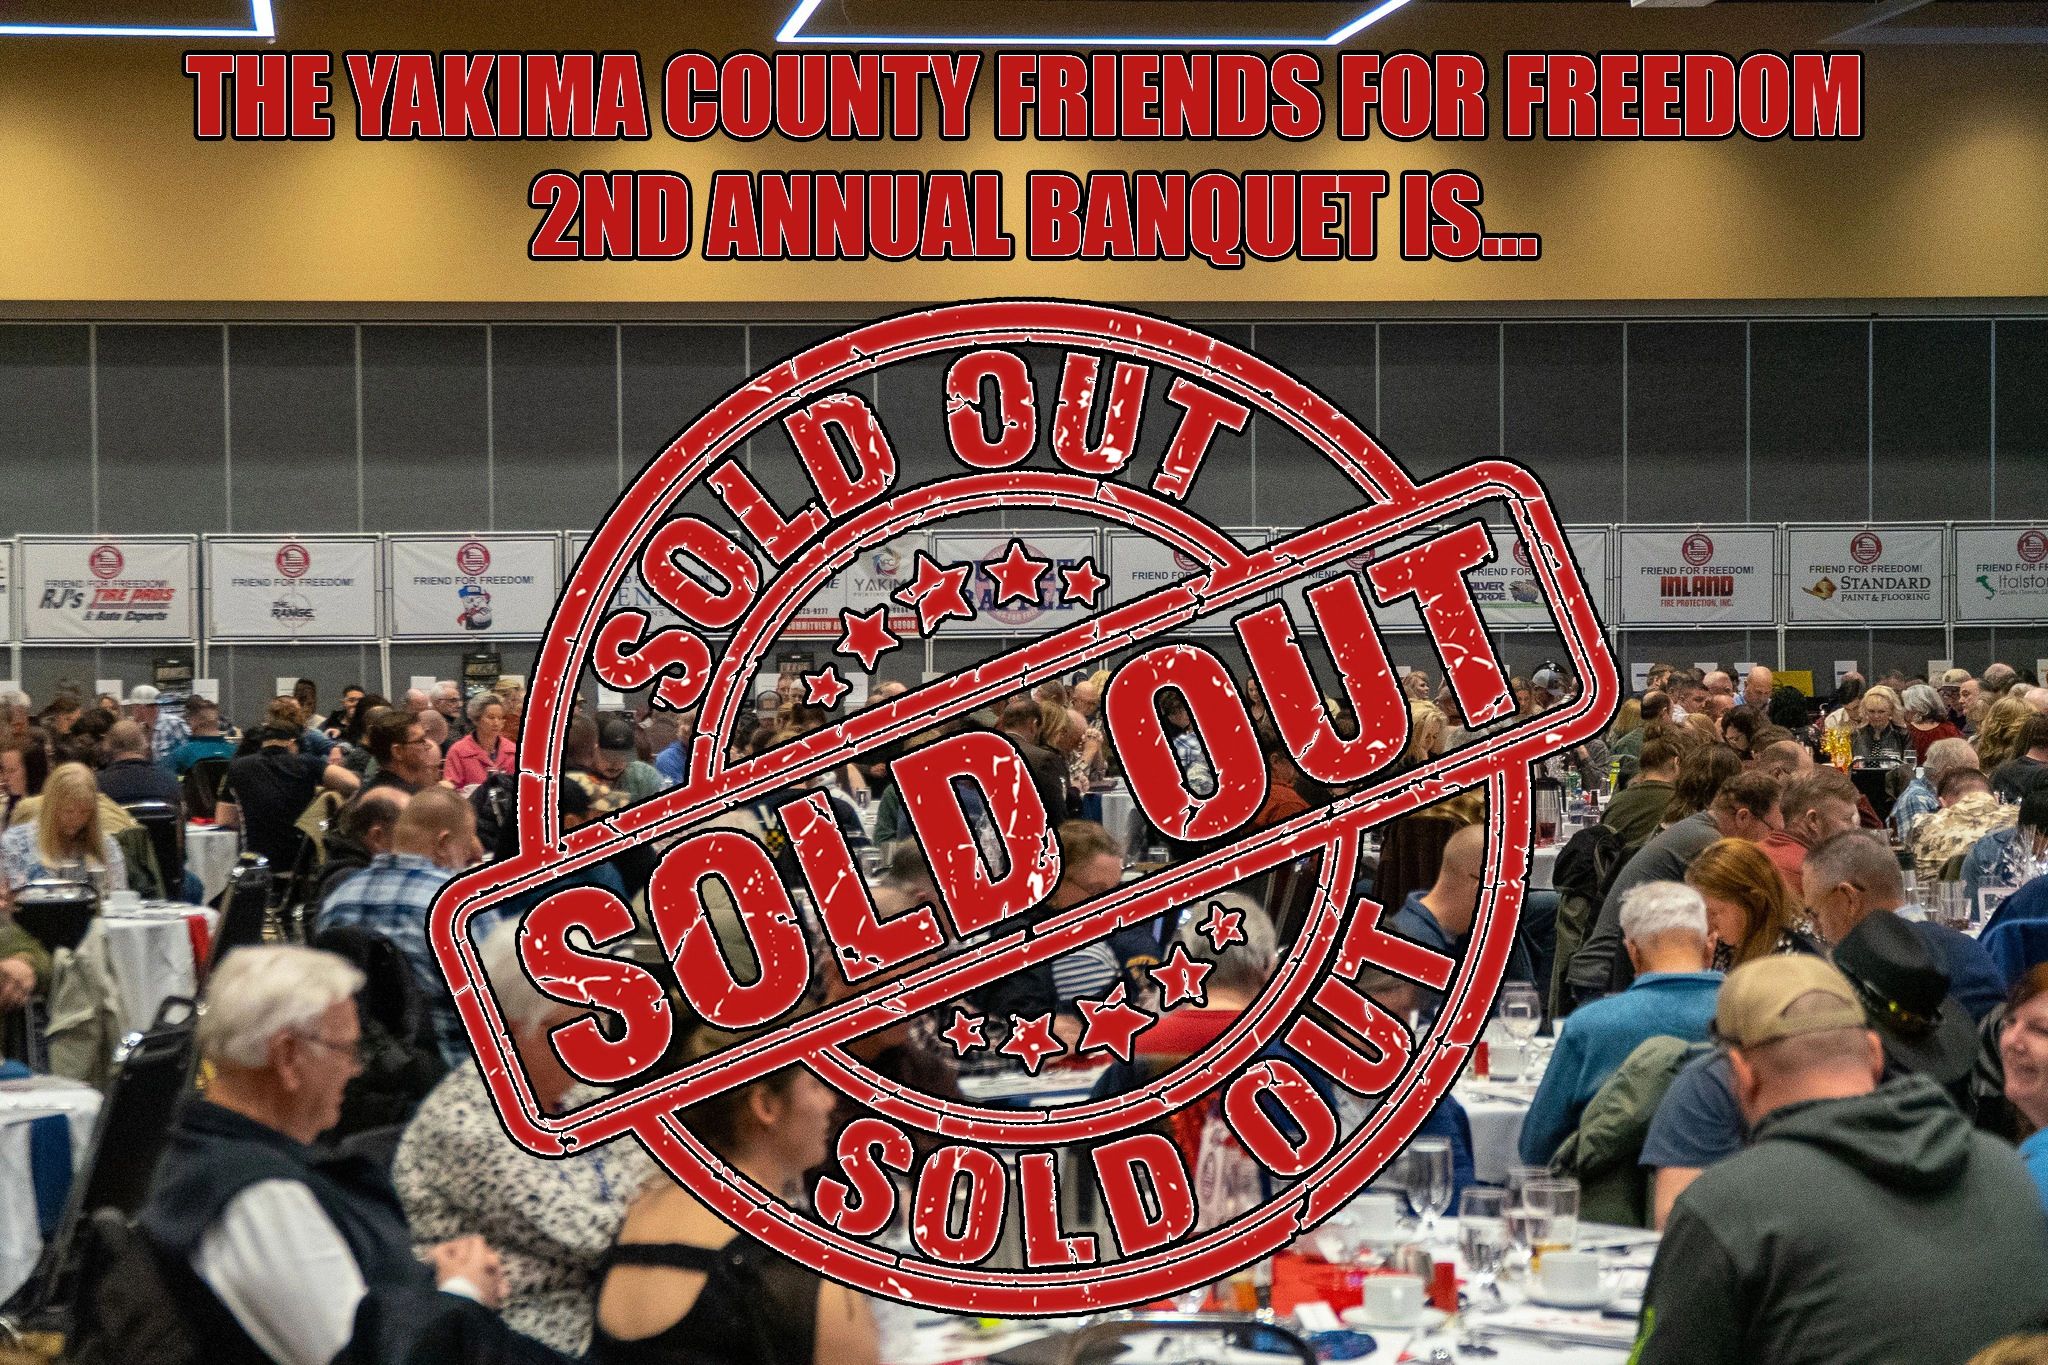 THANK YOU, YAKIMA COUNTY, FOR THE OVERWHELMING SUPPORT AND ENTHUSIASM FOR OUR MISSION